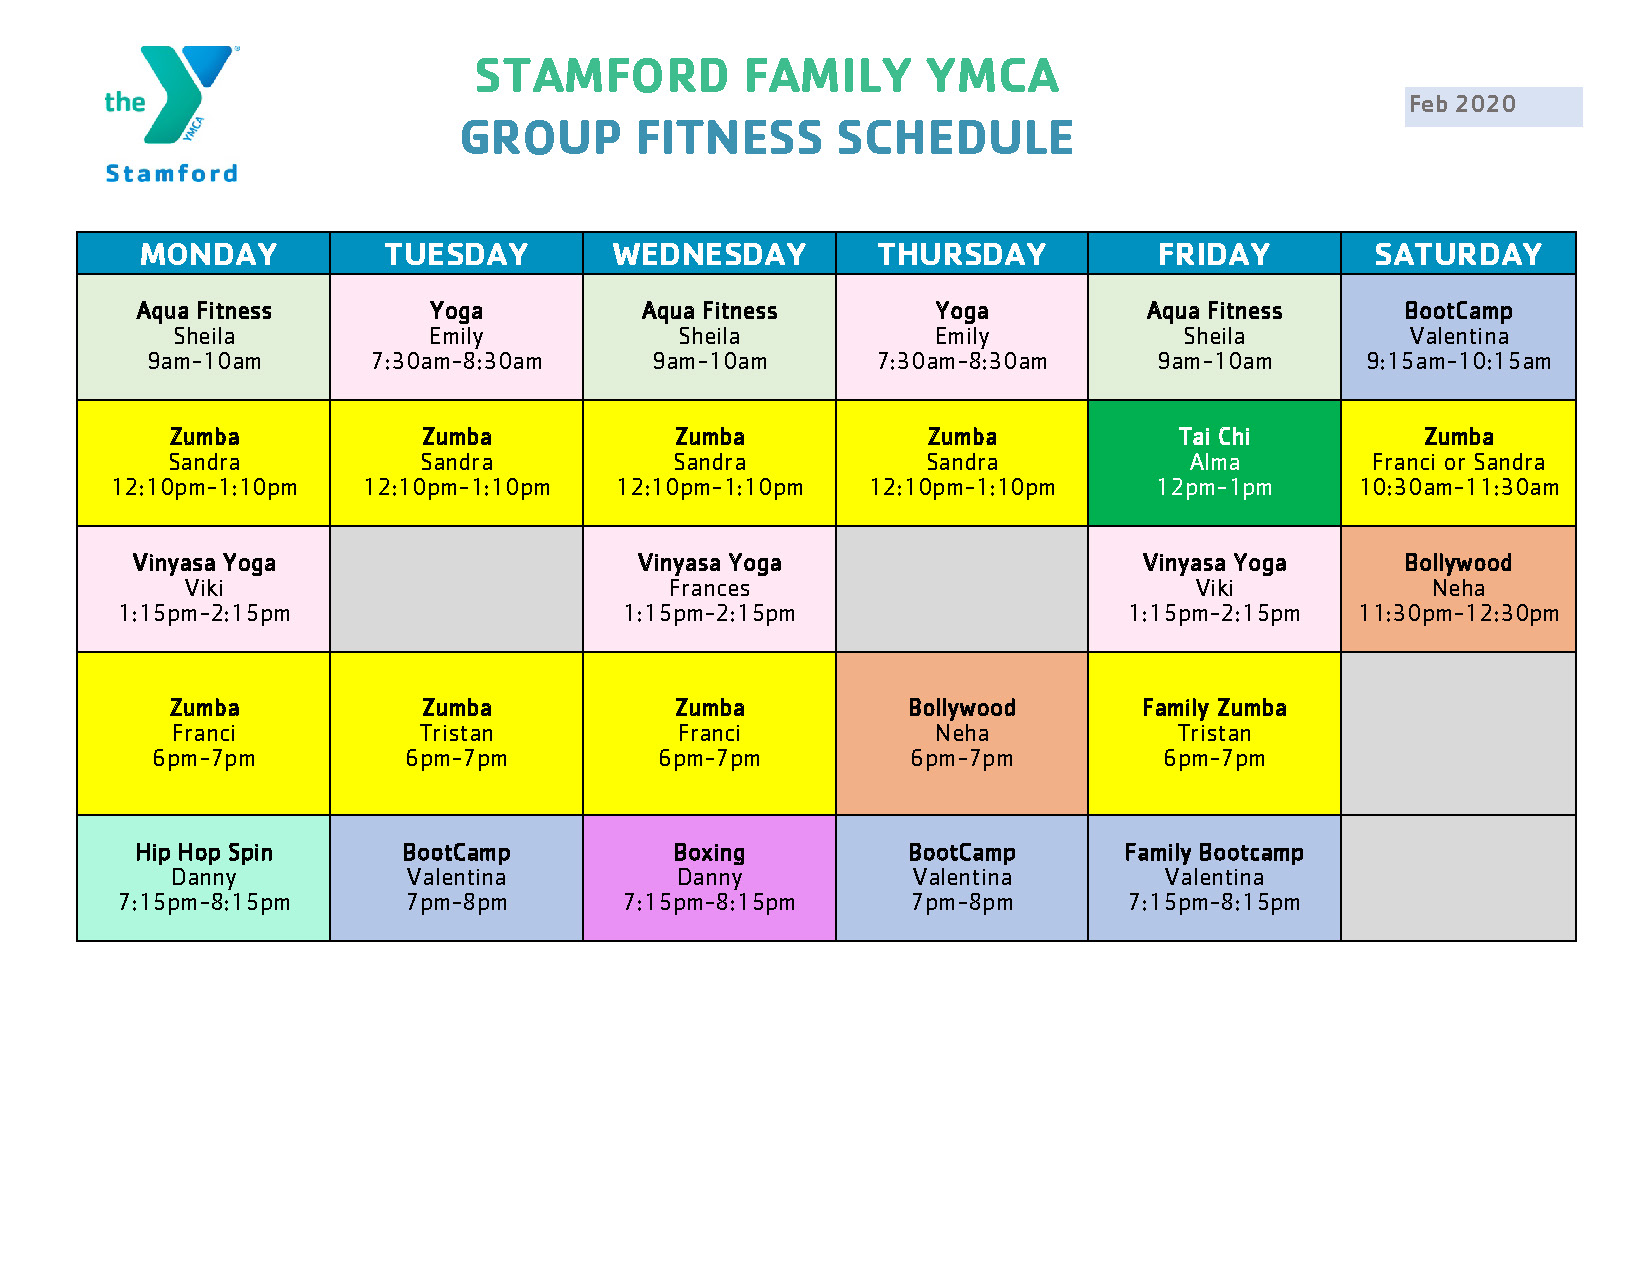 Group Fitness Schedule – Stamford Family YMCA